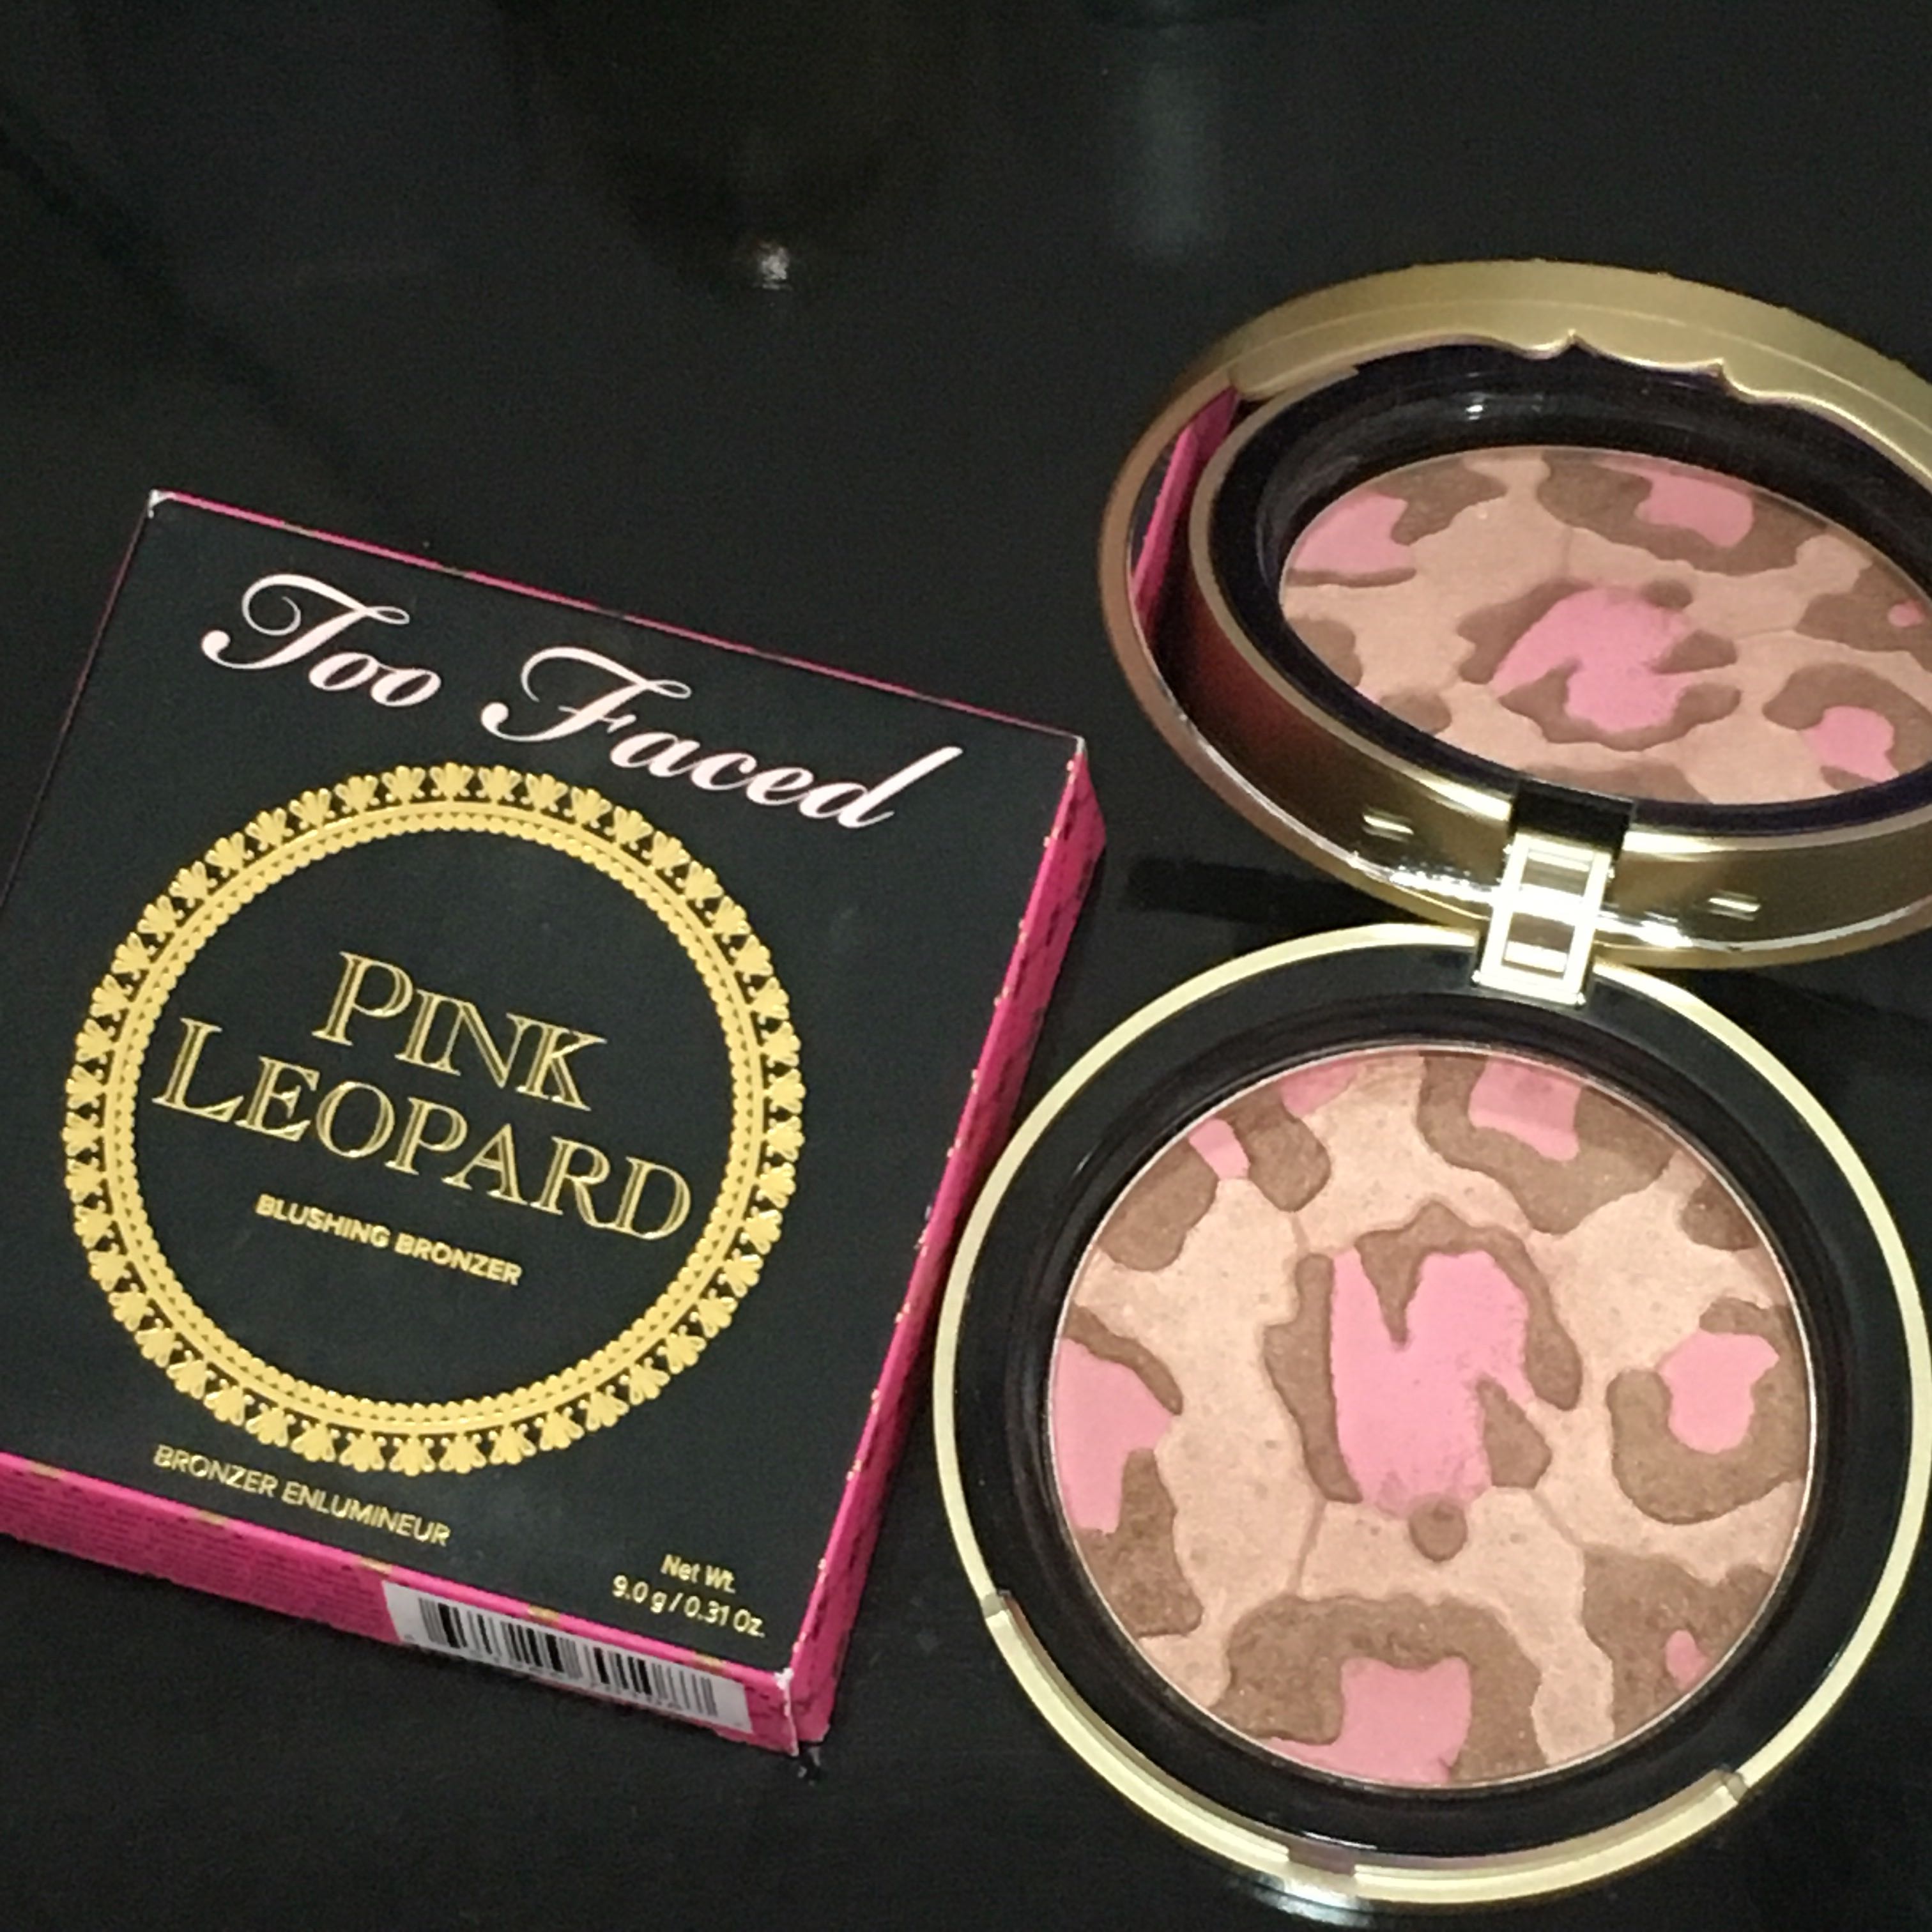 Authentic Too Faced Pink Leopard Blushing Bronzer Face Powder Full Size 9.0g, Beauty Personal Care, Face, Makeup on Carousell